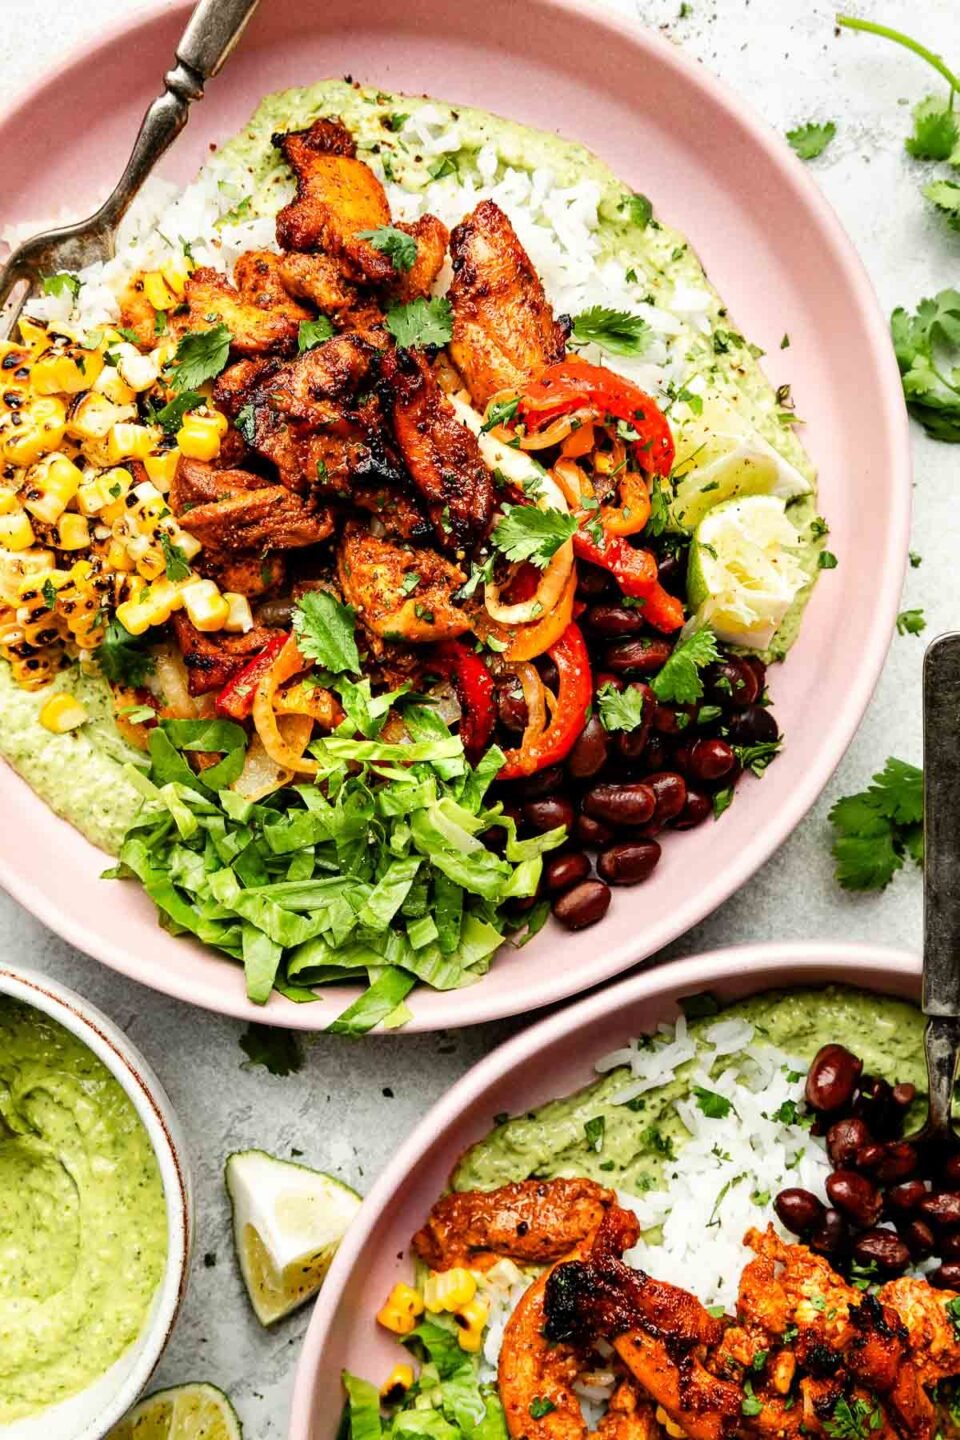 An overhead shot of two assembled fajita bowls on a light pink plate atop a striped cloth on a light grey surface: avocado crema, fajitas, lettuce, corn, pico de gallo, rice and black beans, topped with cilantro. A bowl of crema sits beside the plates.